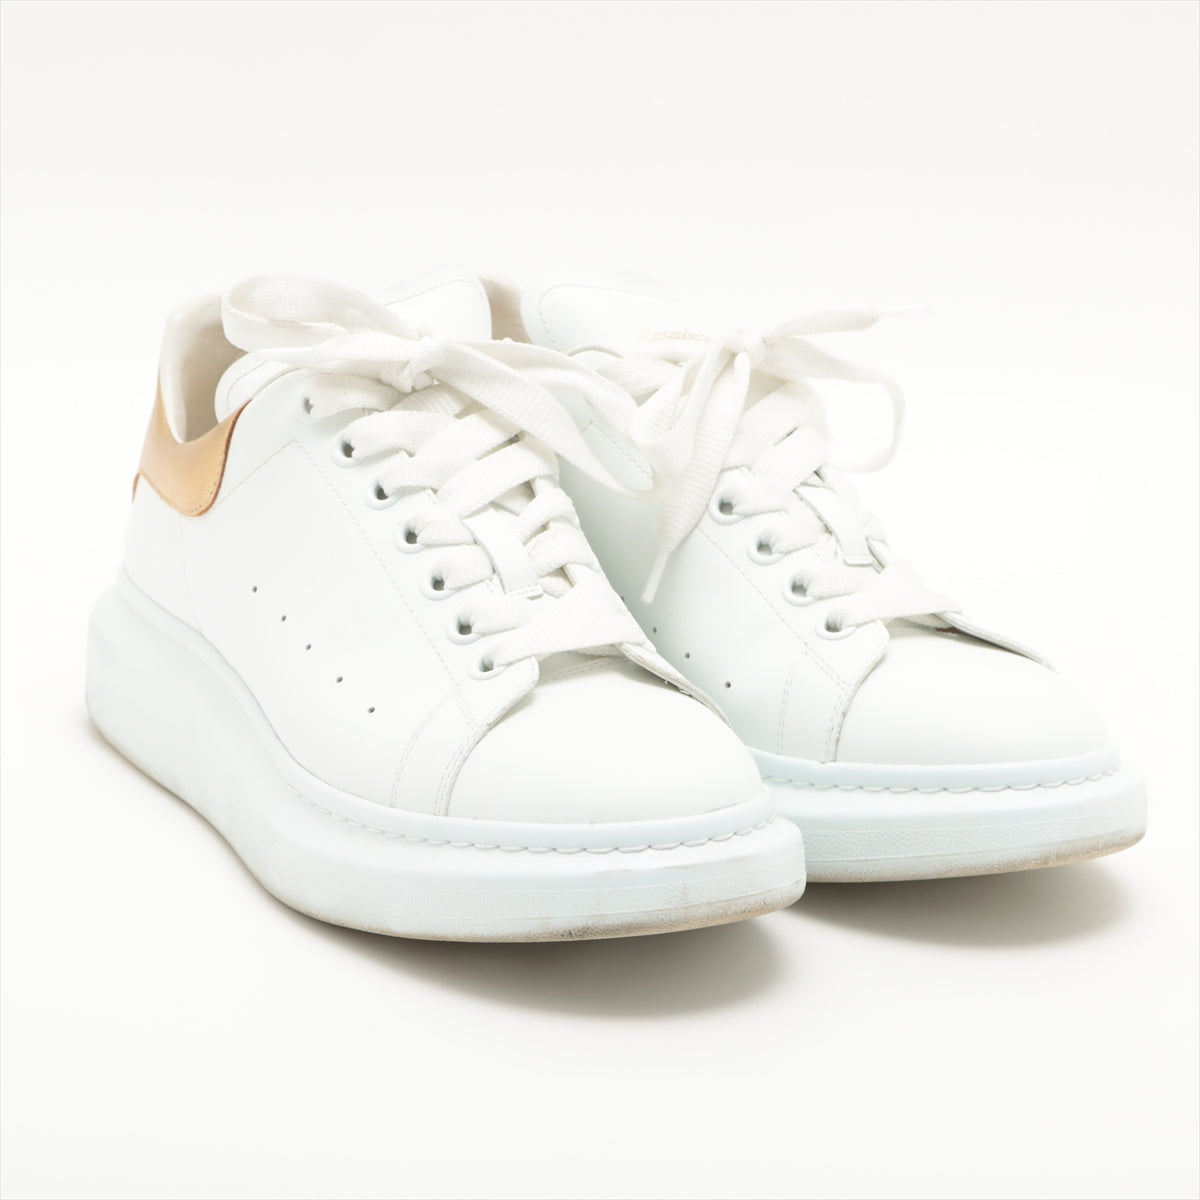 Alexander McQueen Leather Sneakers 43 Men's White x gold 553680 box There is a replacement string